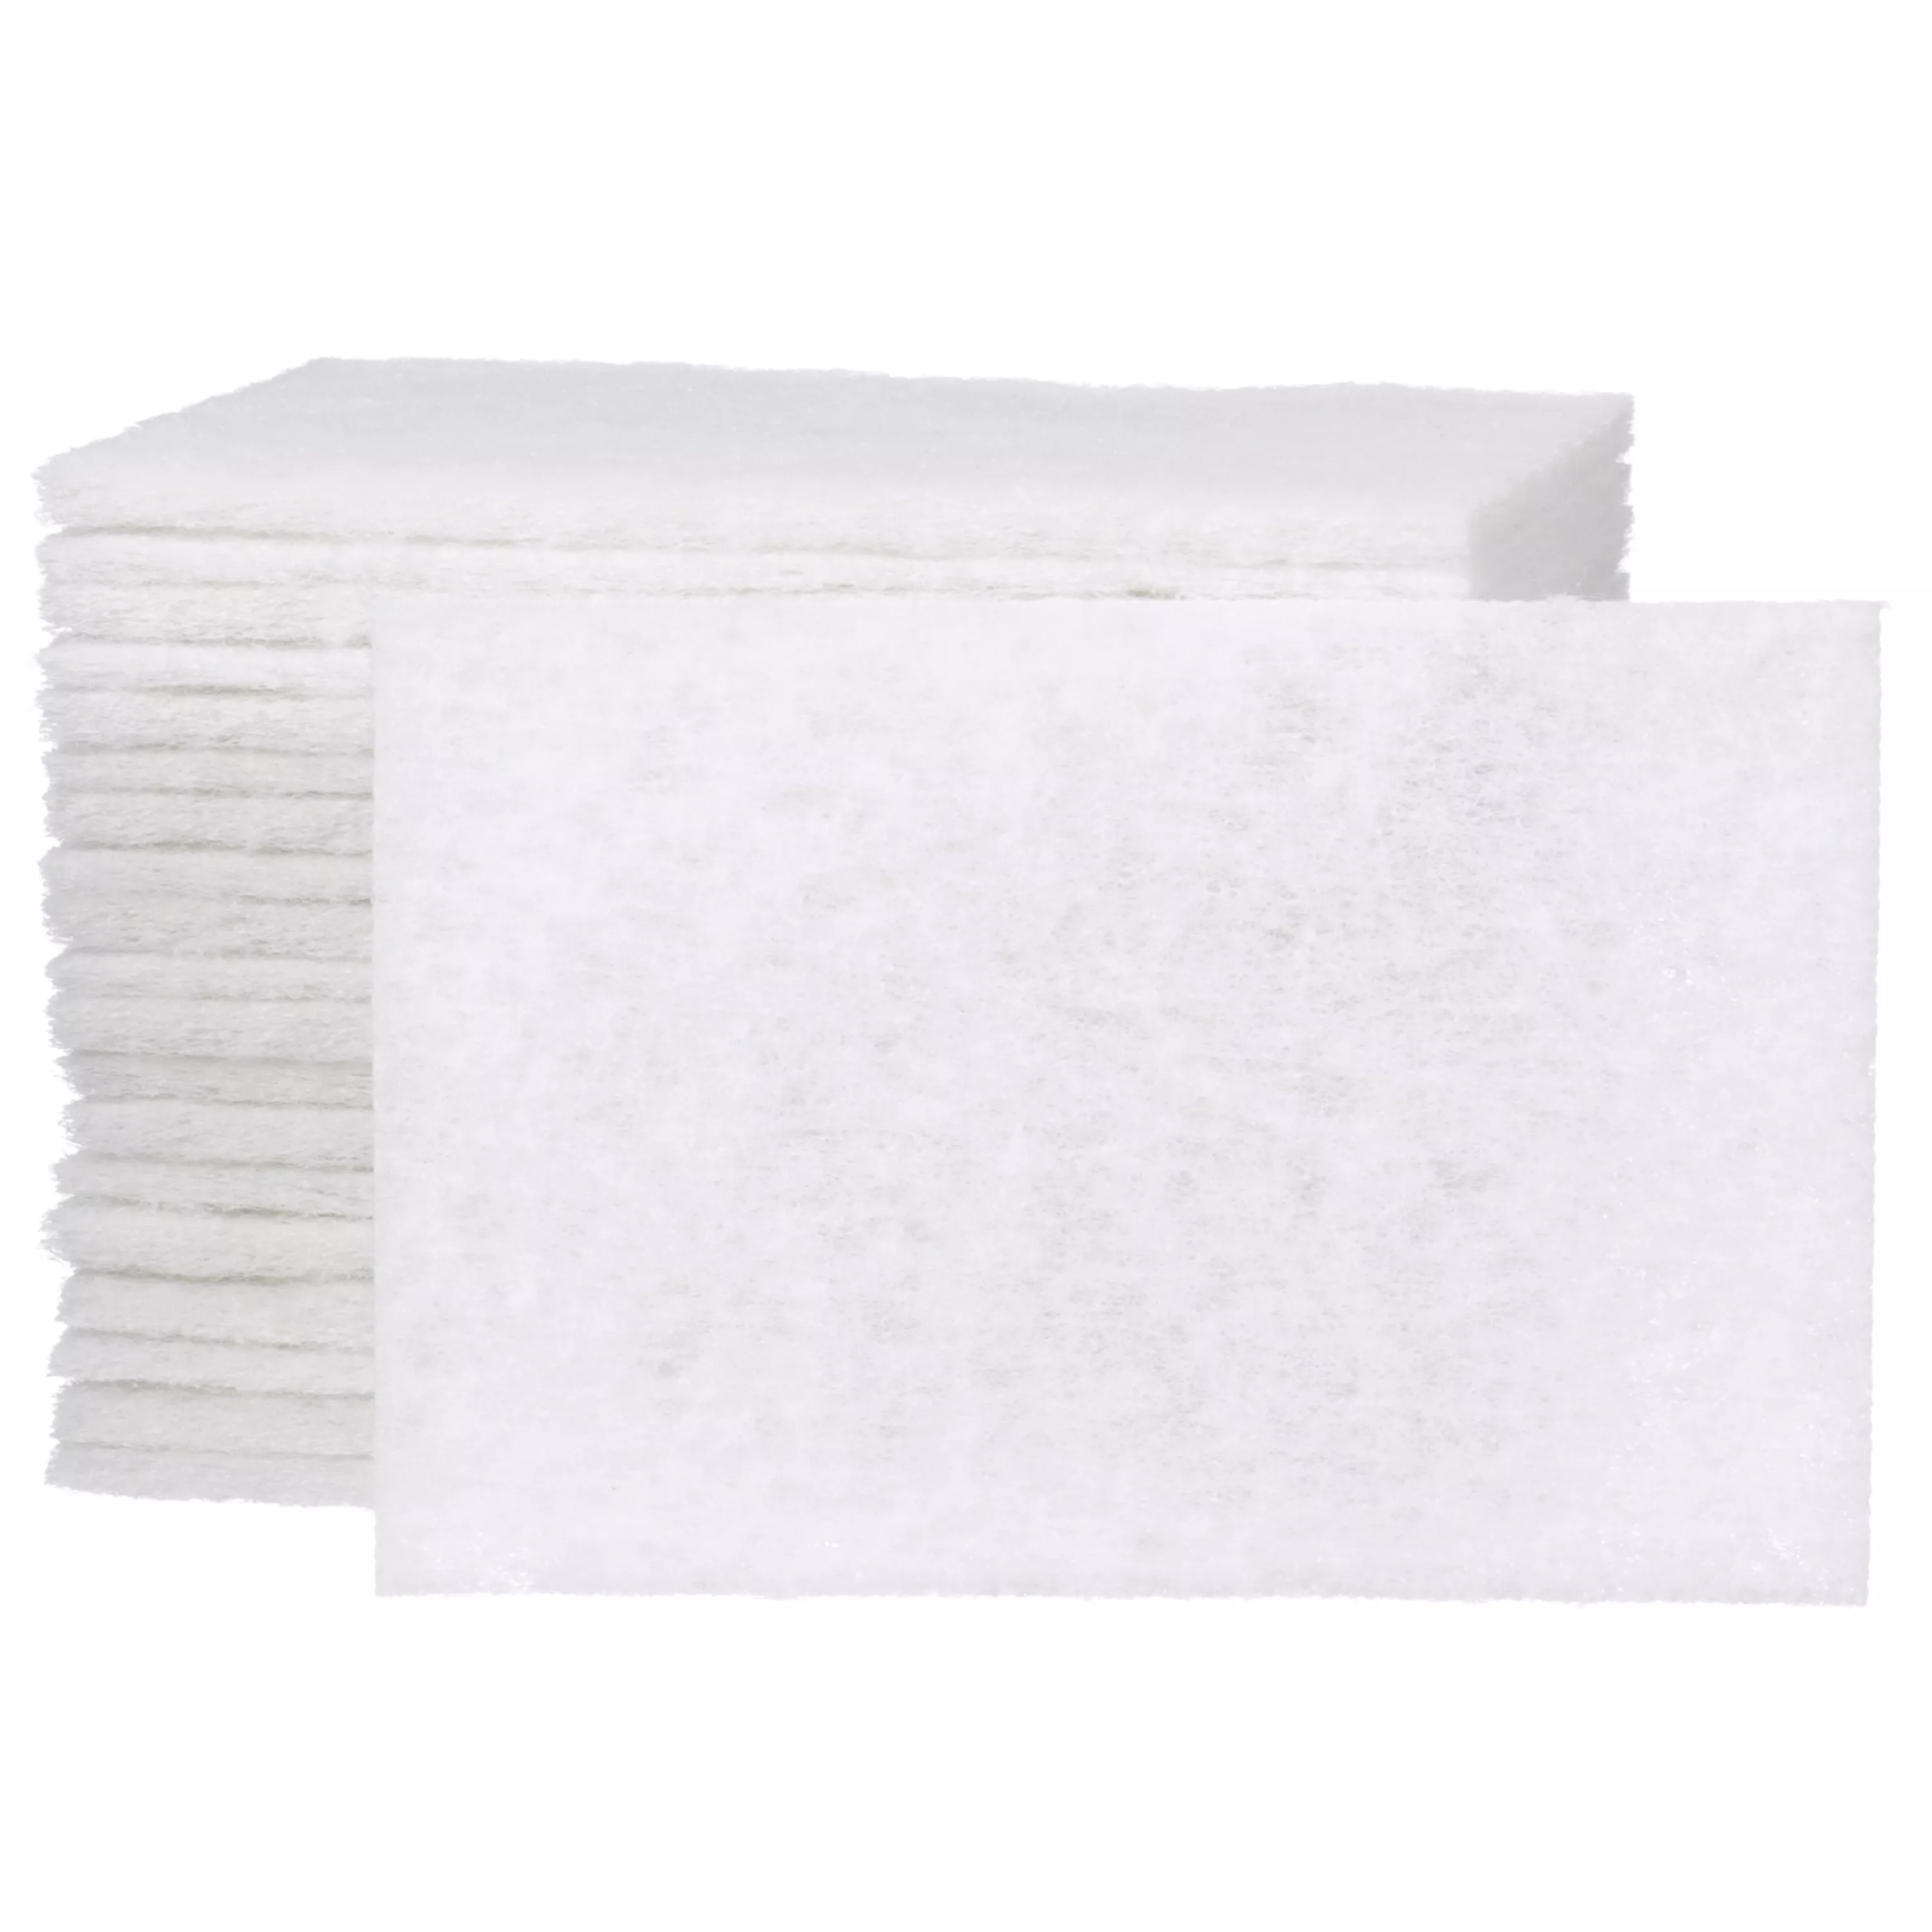 Product Number HP-HP 7445 | Light Duty Cleansing Pad 7445